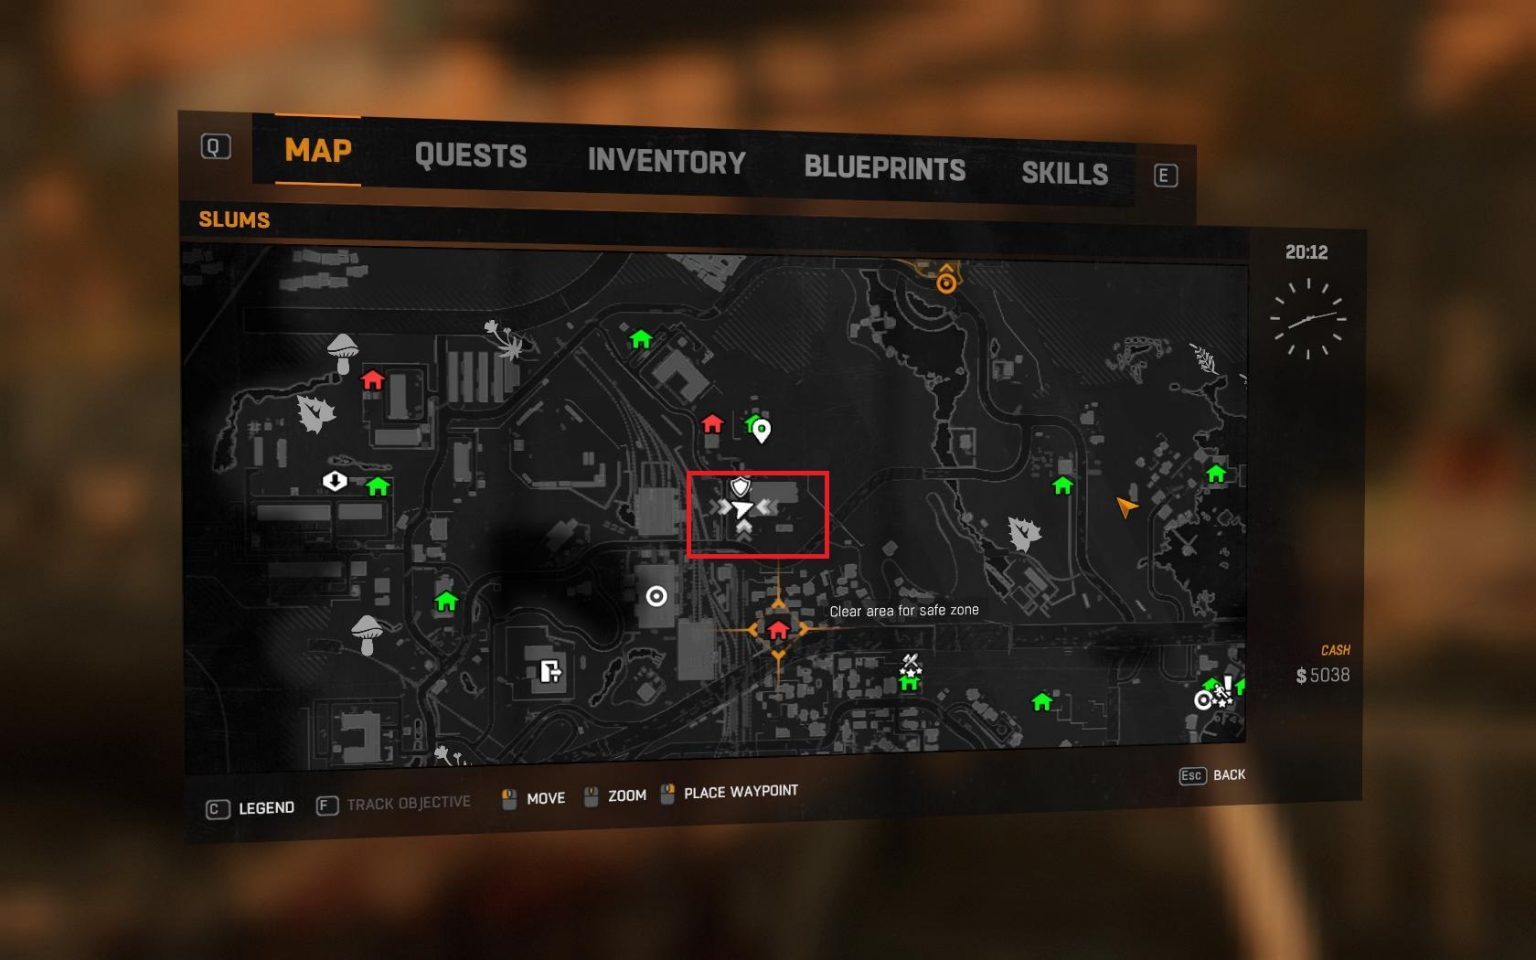 dying light the following missions